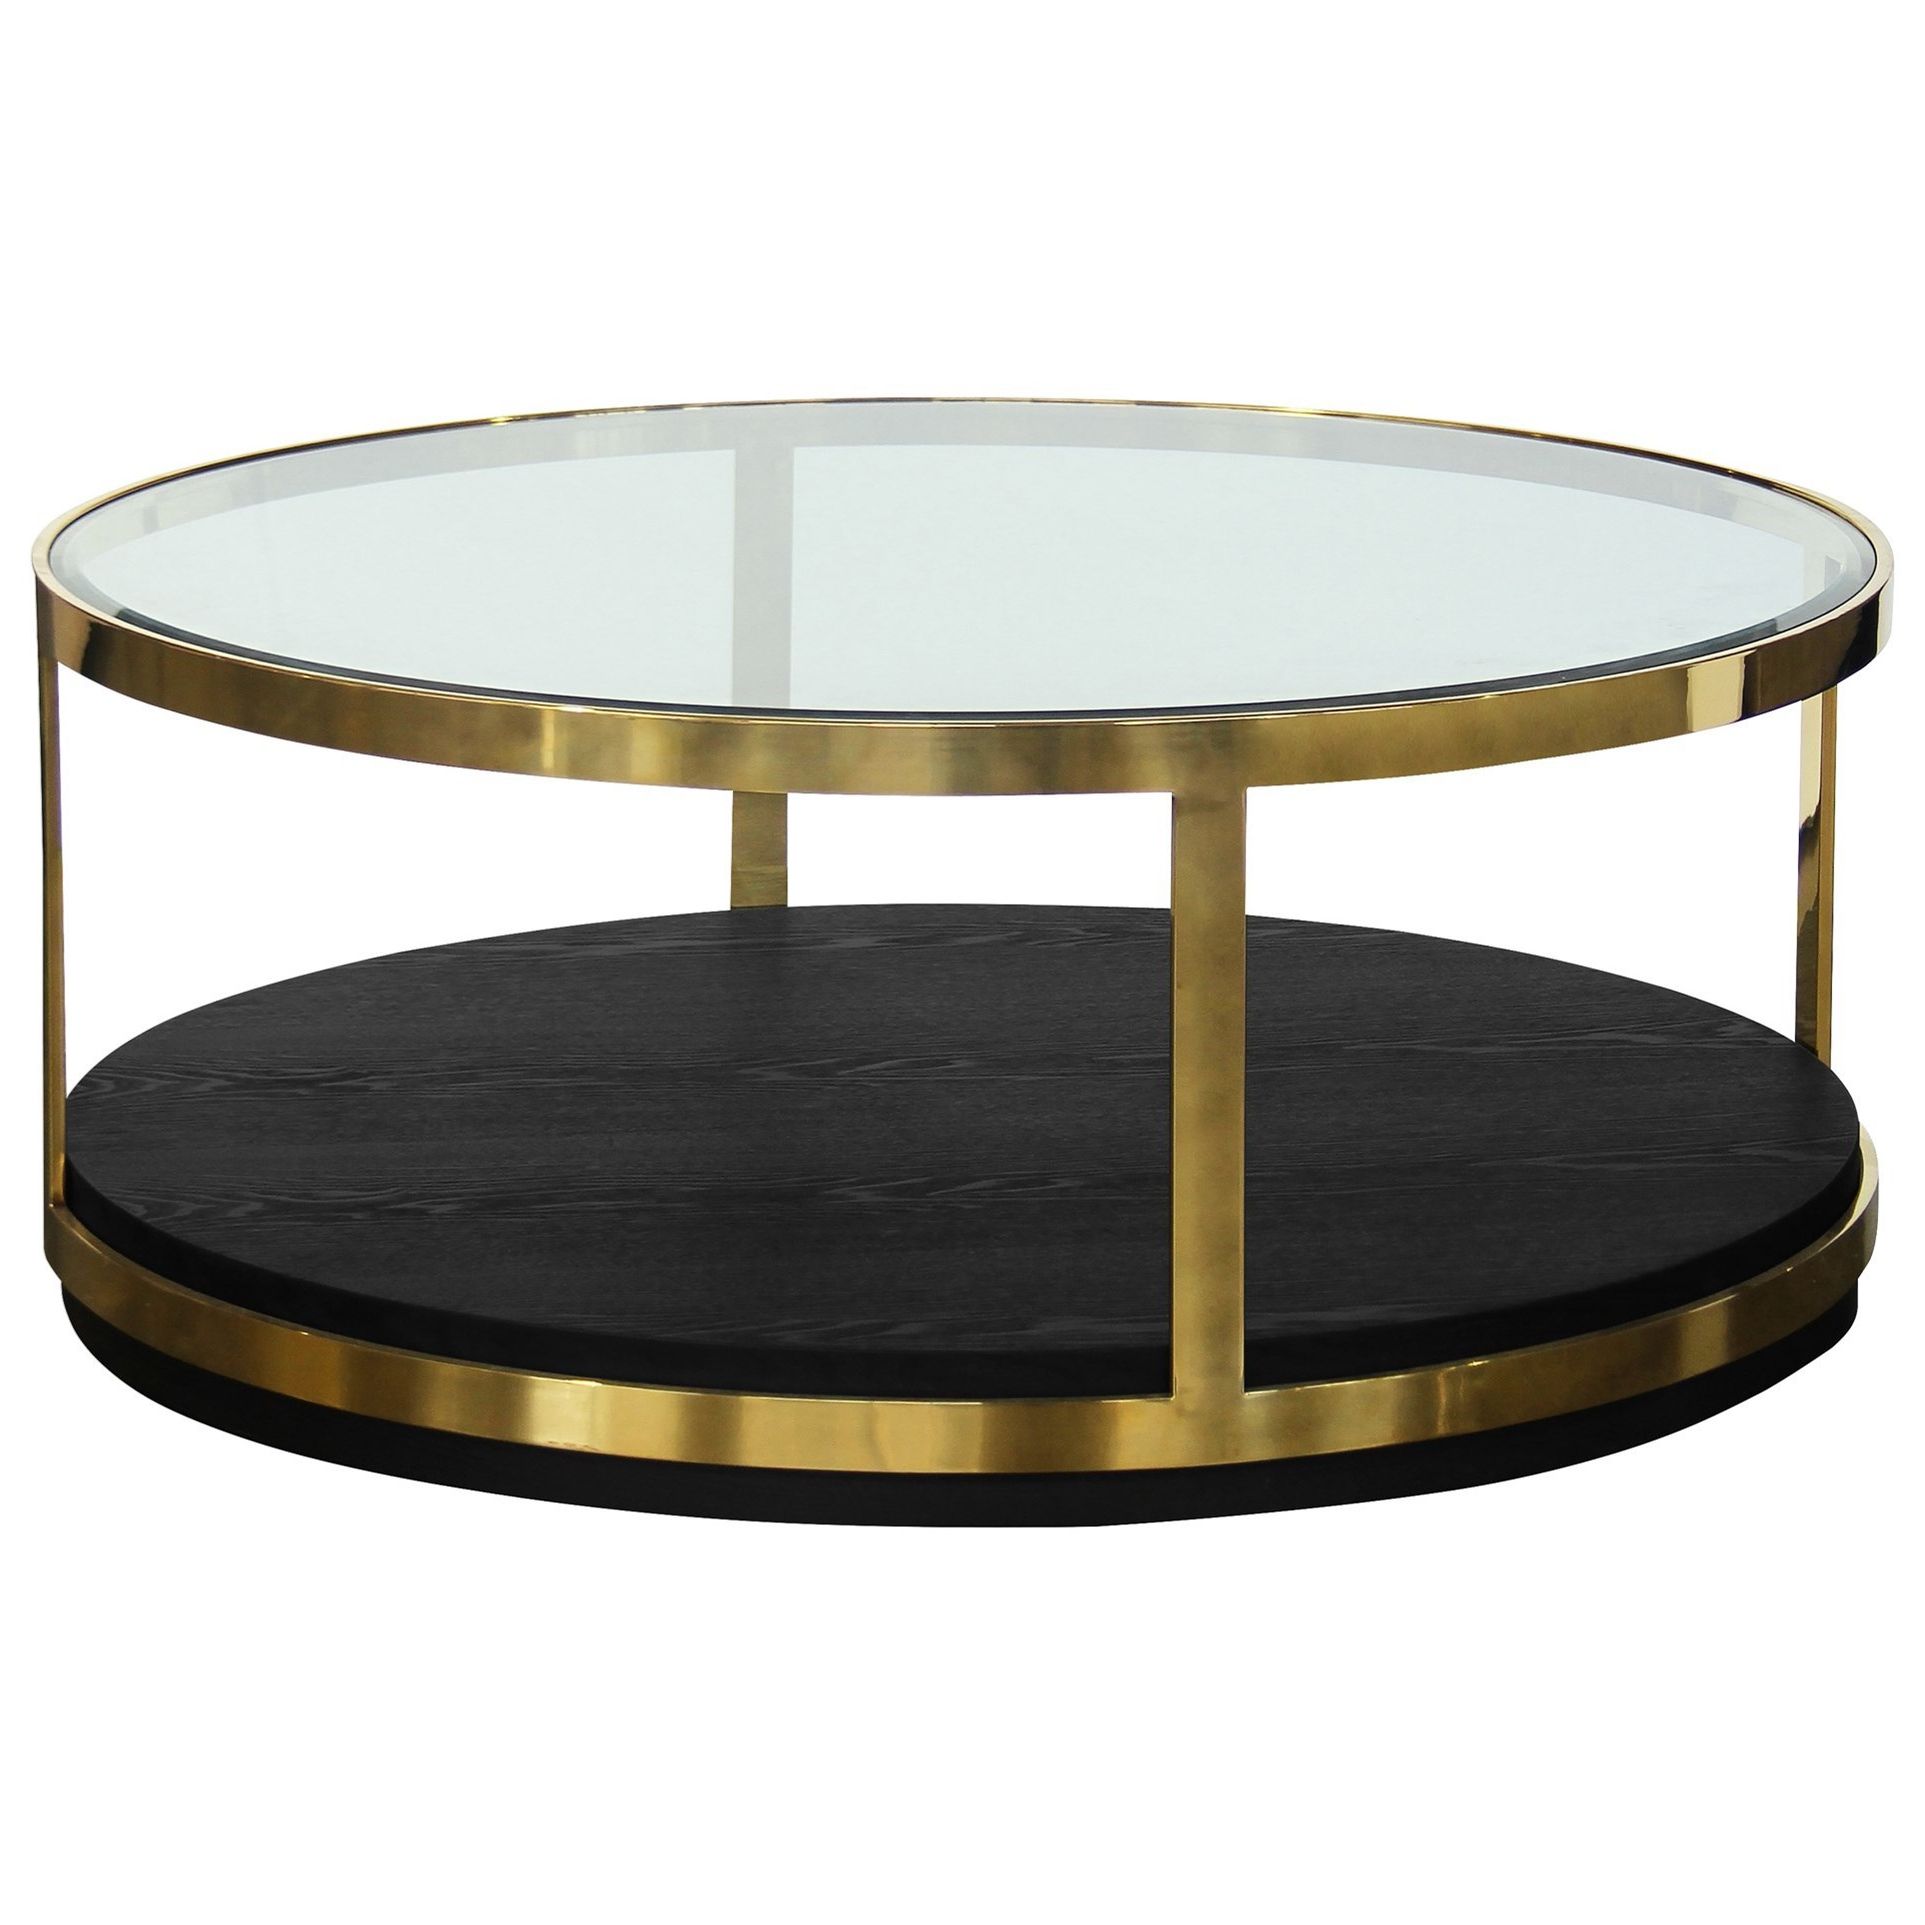 Square Black And Brushed Gold Coffee Tables Throughout Well Liked Hattie Contemporary Coffee Table In Brushed Gold Finish And Black Wood (View 1 of 10)